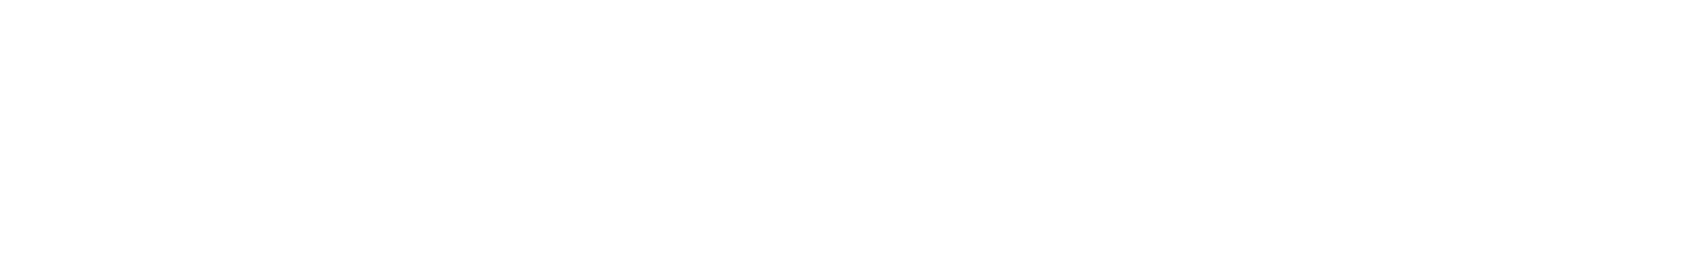 Fukushima Now:A Decade of Reconstruction and Decommissioning